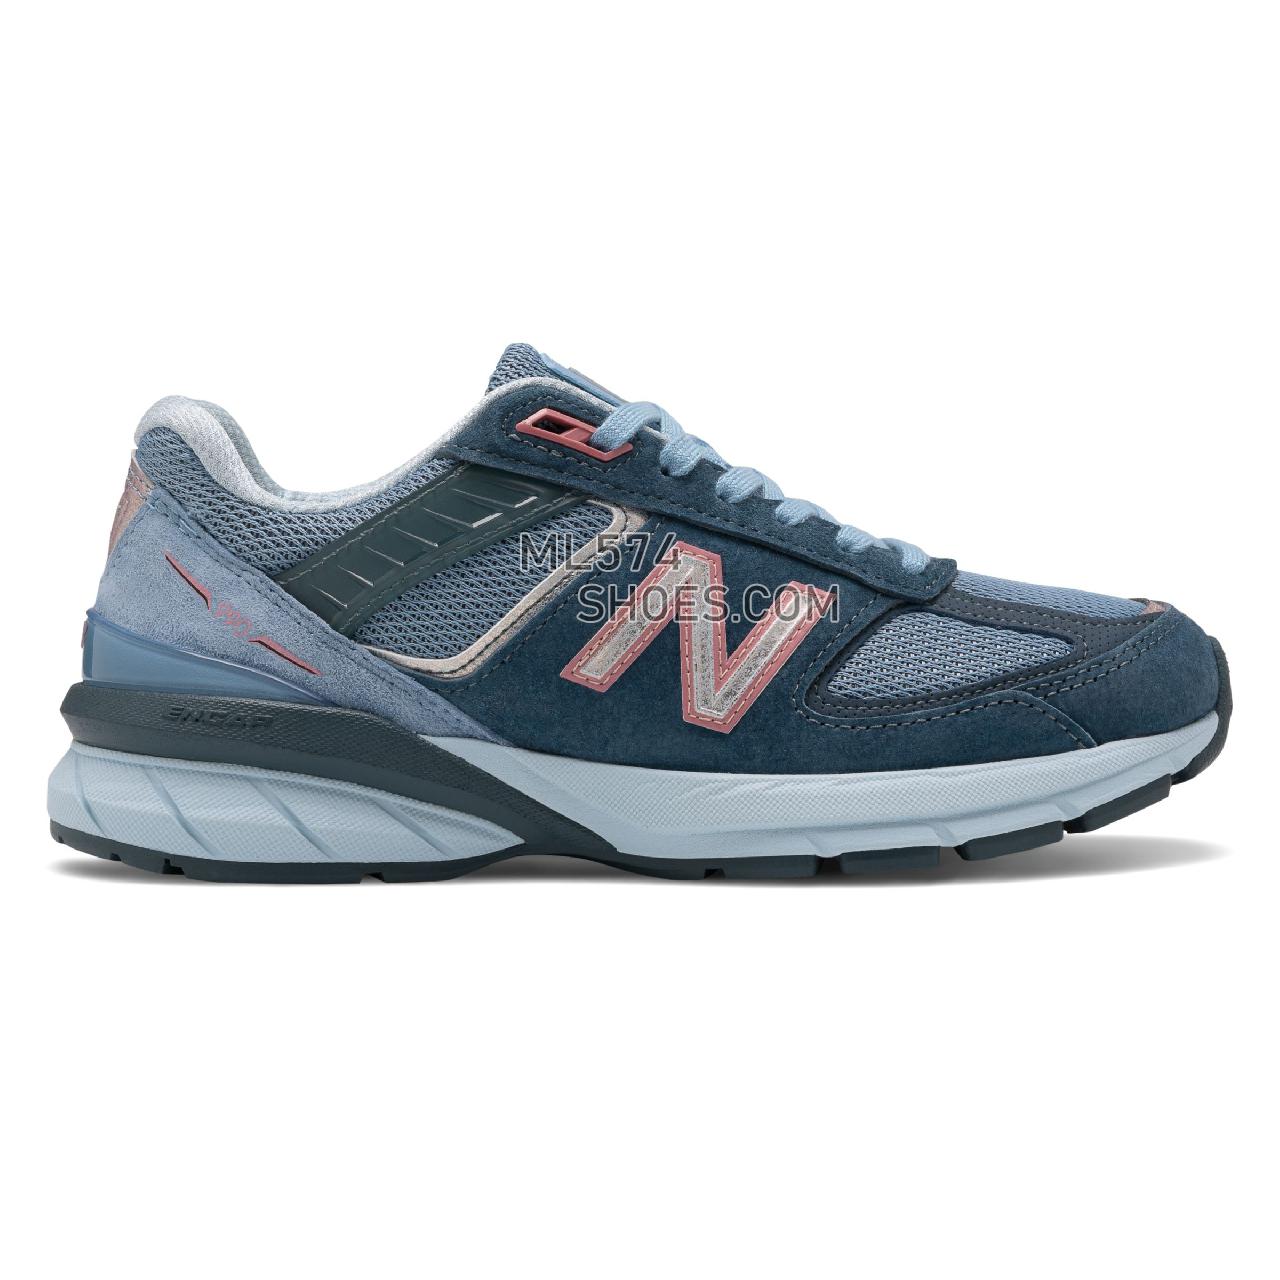 New Balance Made in US 990v5 - Women's Neutral Running - Orion Blue with Lyons Blue - W990OL5